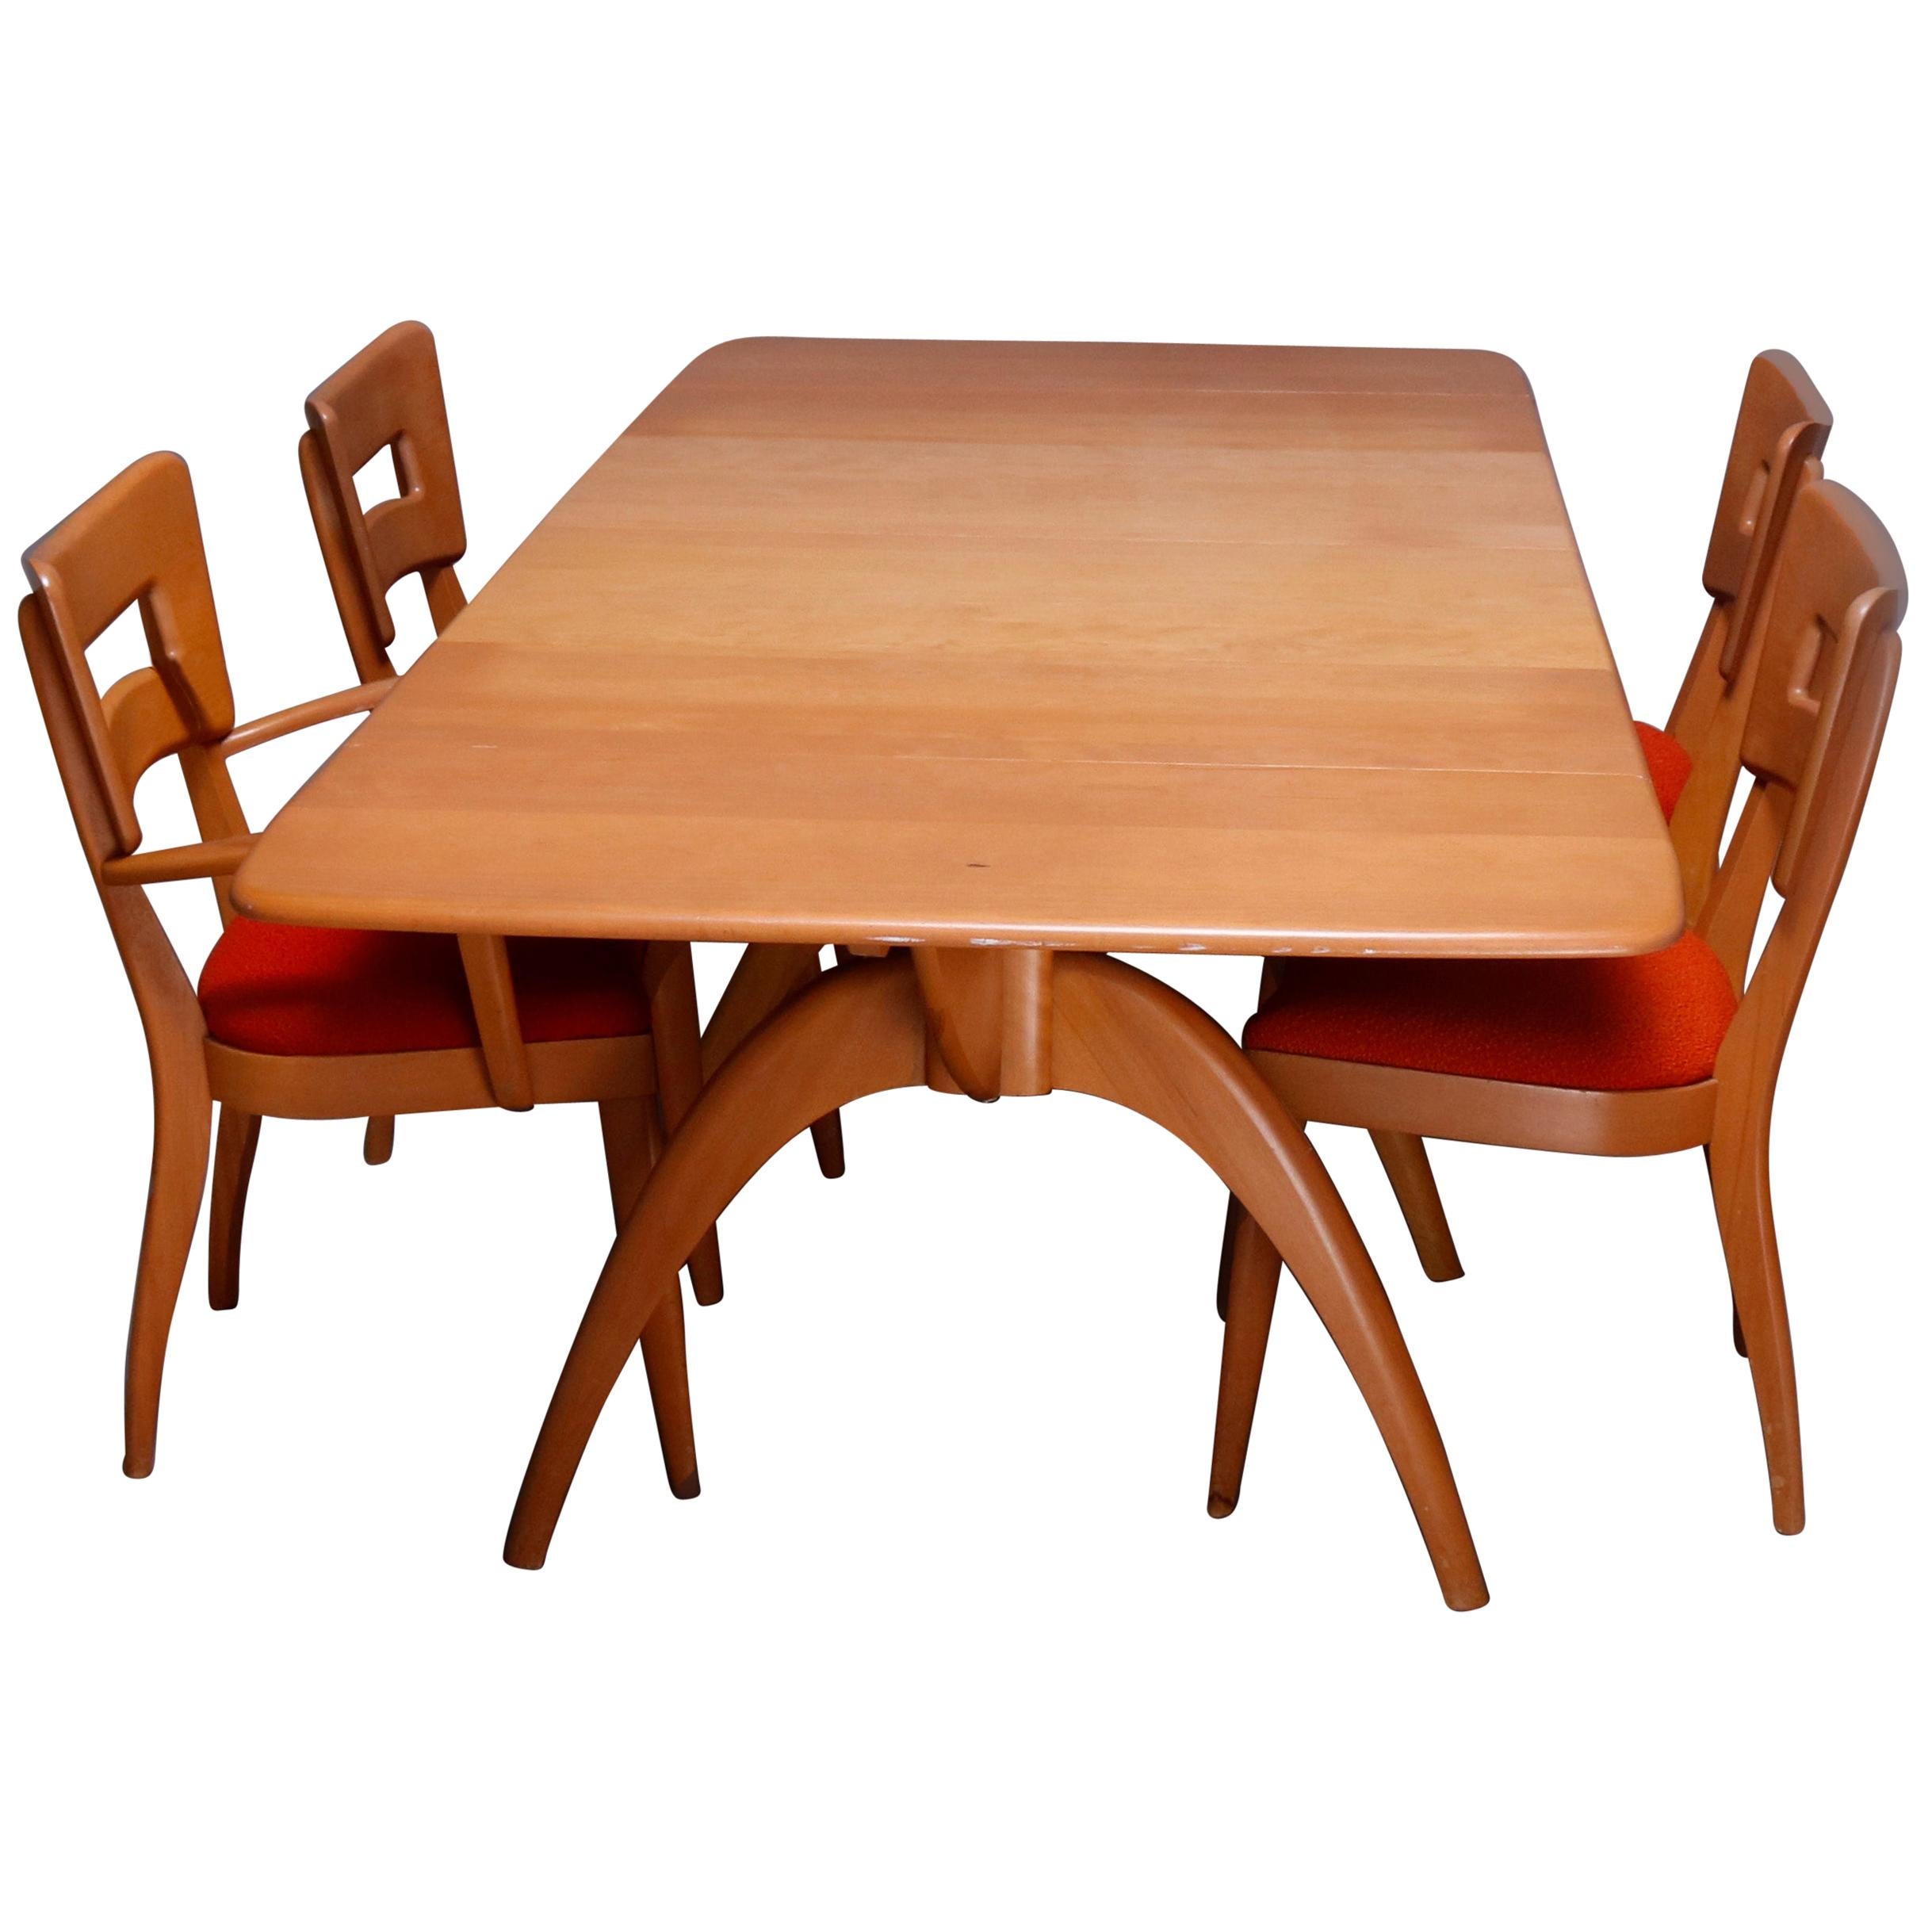 Mid-Century Modern Heywood Wakefield Dog Bone Dining Set, Table with Four Chairs